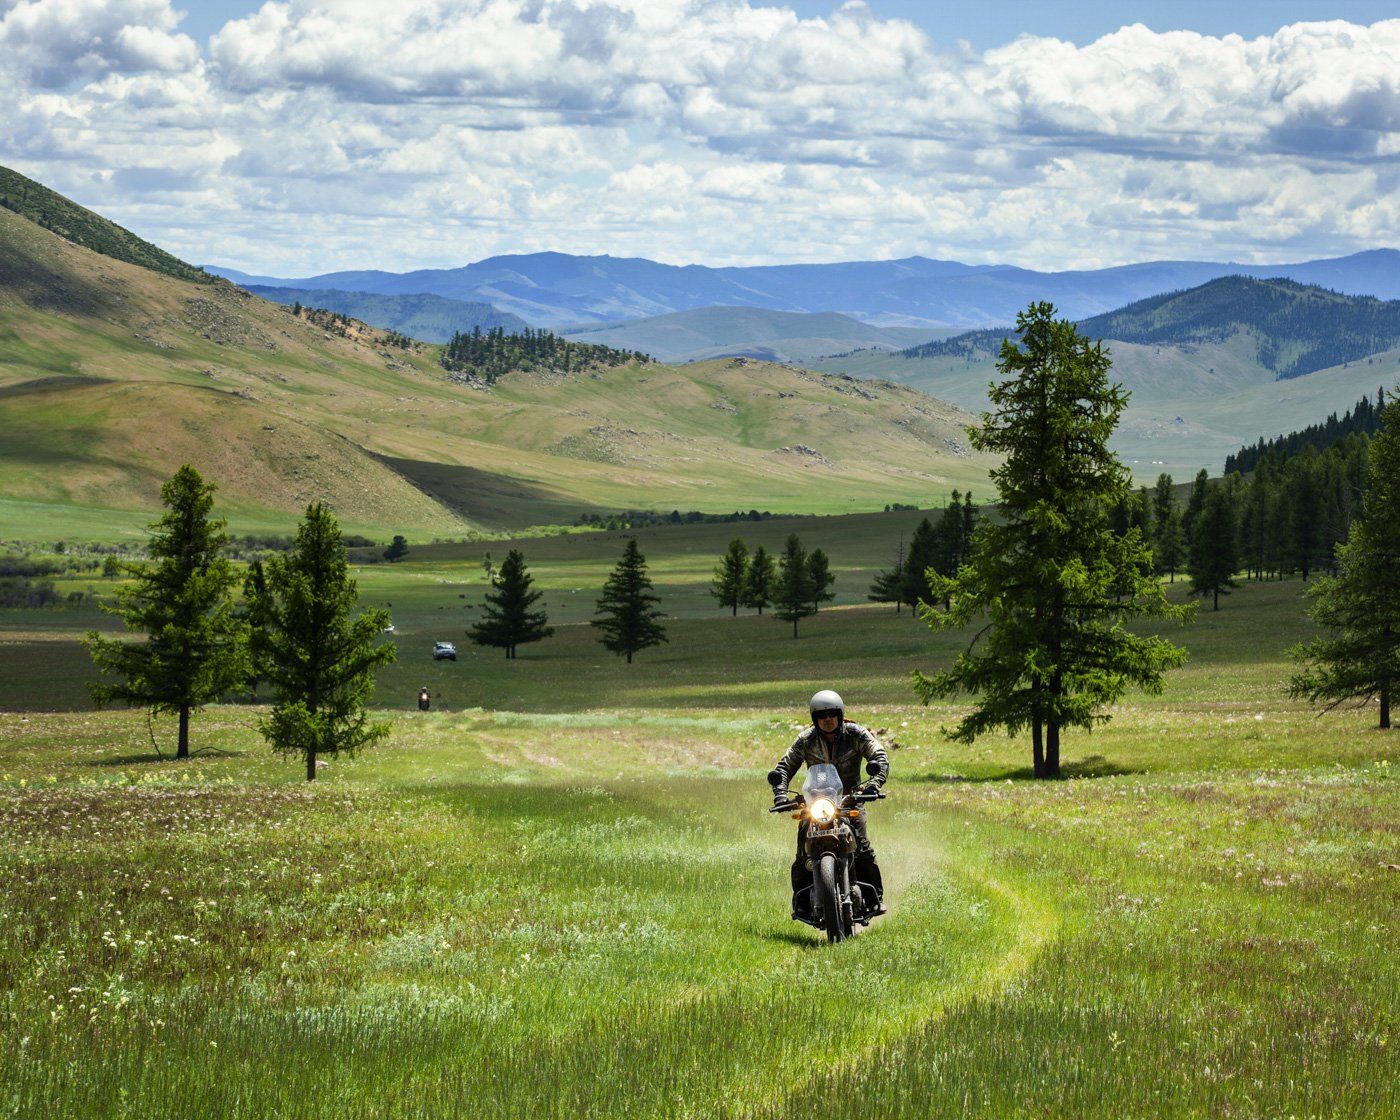 Motorcycle road trip Mongolia - The Wild Spirit of the Steppe